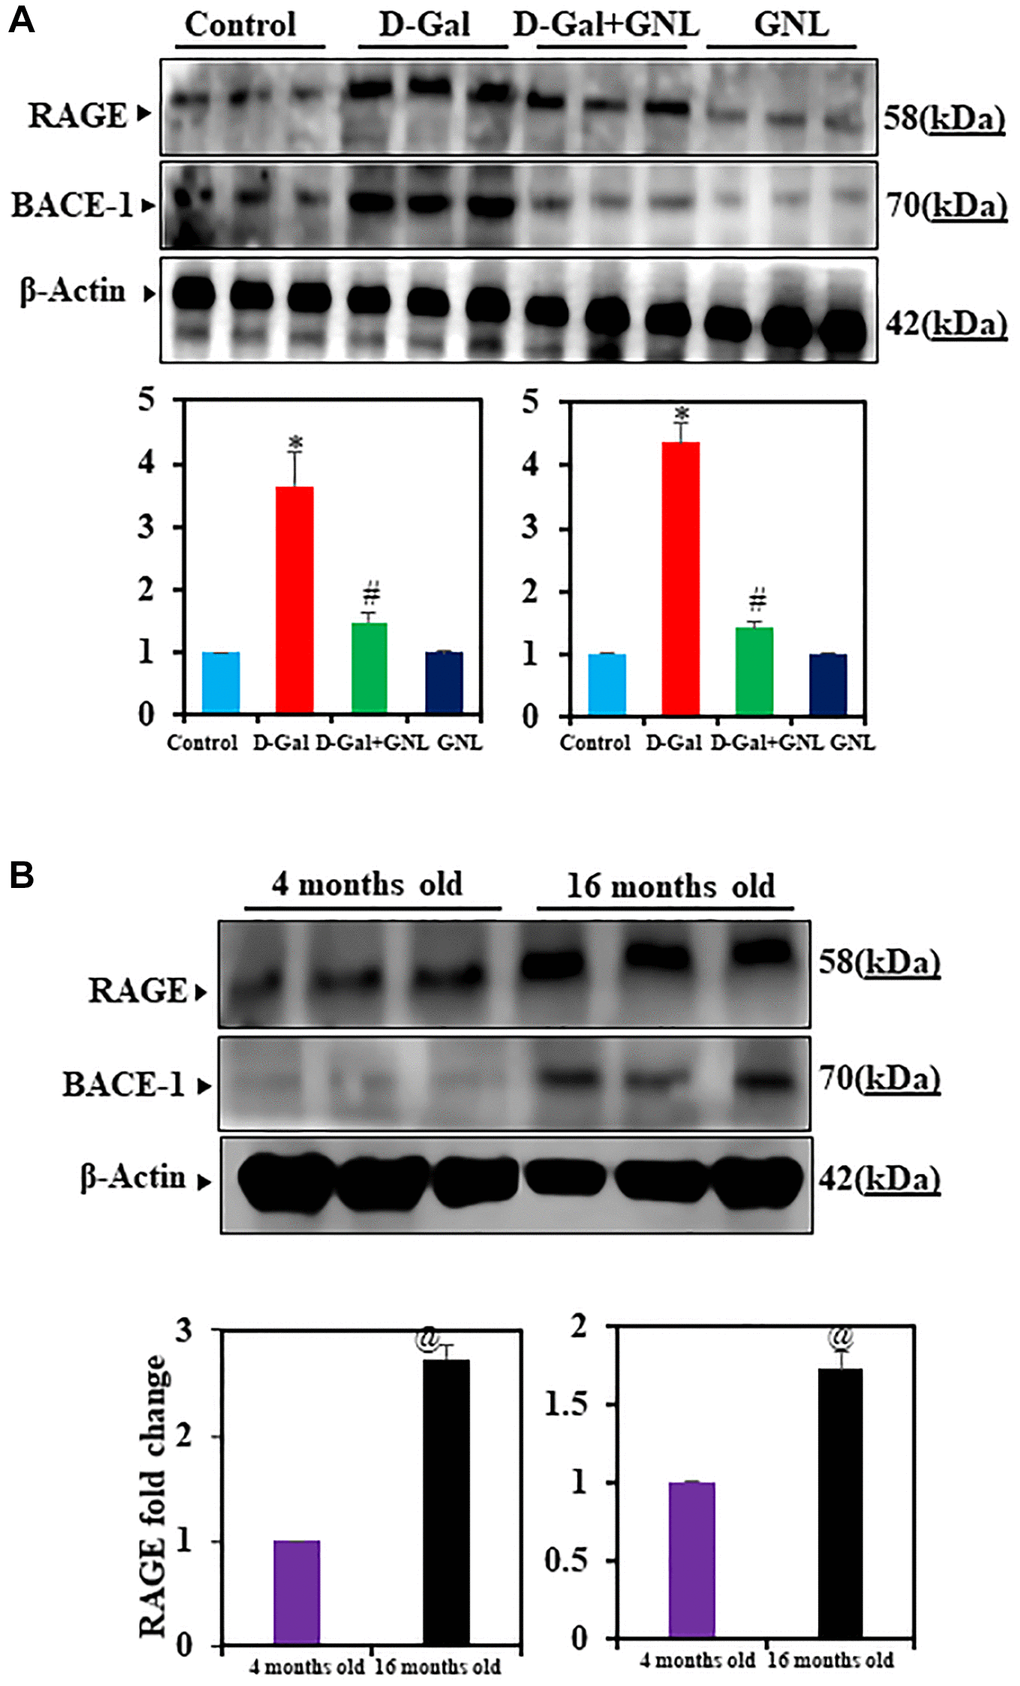 Effect of GNL on D-gal-induced cognitive impairment mice of RAGE and BACE-1 proteins in the hippocampus. (A) A Western blot analysis of the RAGE and BACE-1 protein levels. Three independent experiments are shown here. SDS-PAGE resolved the protein from each sample, and Western blots were done. The internal load controllers were β-actin. Densitometry analysis calculated changes in protein bands as 1.0-fold, as shown below the gel. (B) 4-month-old young control and 16-month-old mouse hippocampus tissue were analyzed for RAGE and BACE-1. The internal load controllers were β-actin. Densitometry analysis calculated changes in protein bands as 1.0-fold. Group I: Control; Group II: D-gal alone (150 mg/wt); Group III: D-gal (150 mg/wt) with GNL (40 mg/wt); and Group IV: GNL alone (40 mg/wt). Group V: 4-month-old young animals; Group VI: 16-month-old Values are expressed as the mean ± SD (n = 6). *P #P @P 